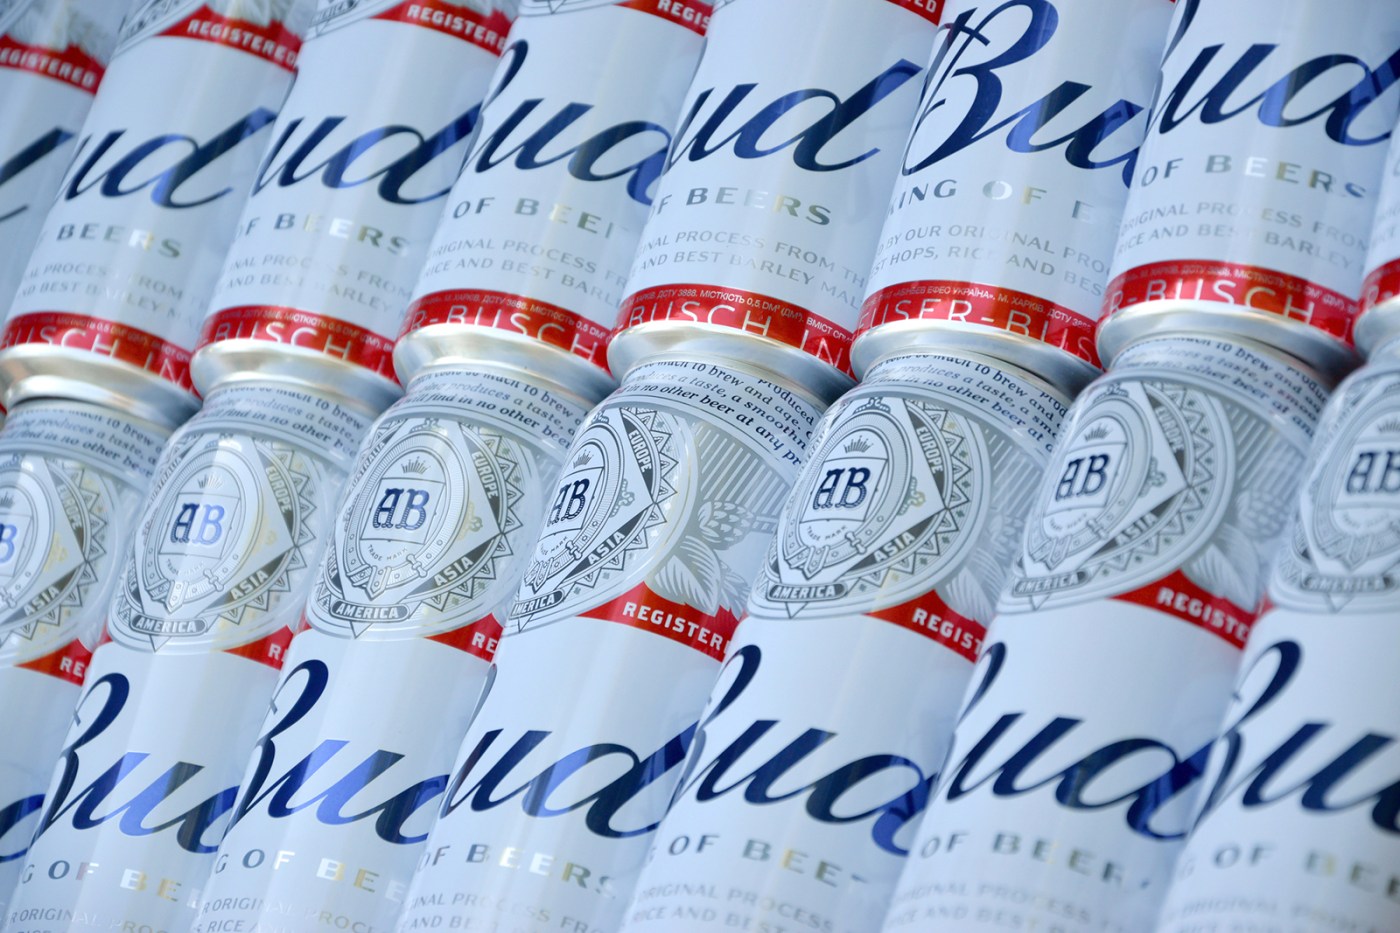 anheuser-busch-beer-sales-are-down.-its-non-alcoholic-options-are-on-the-rise